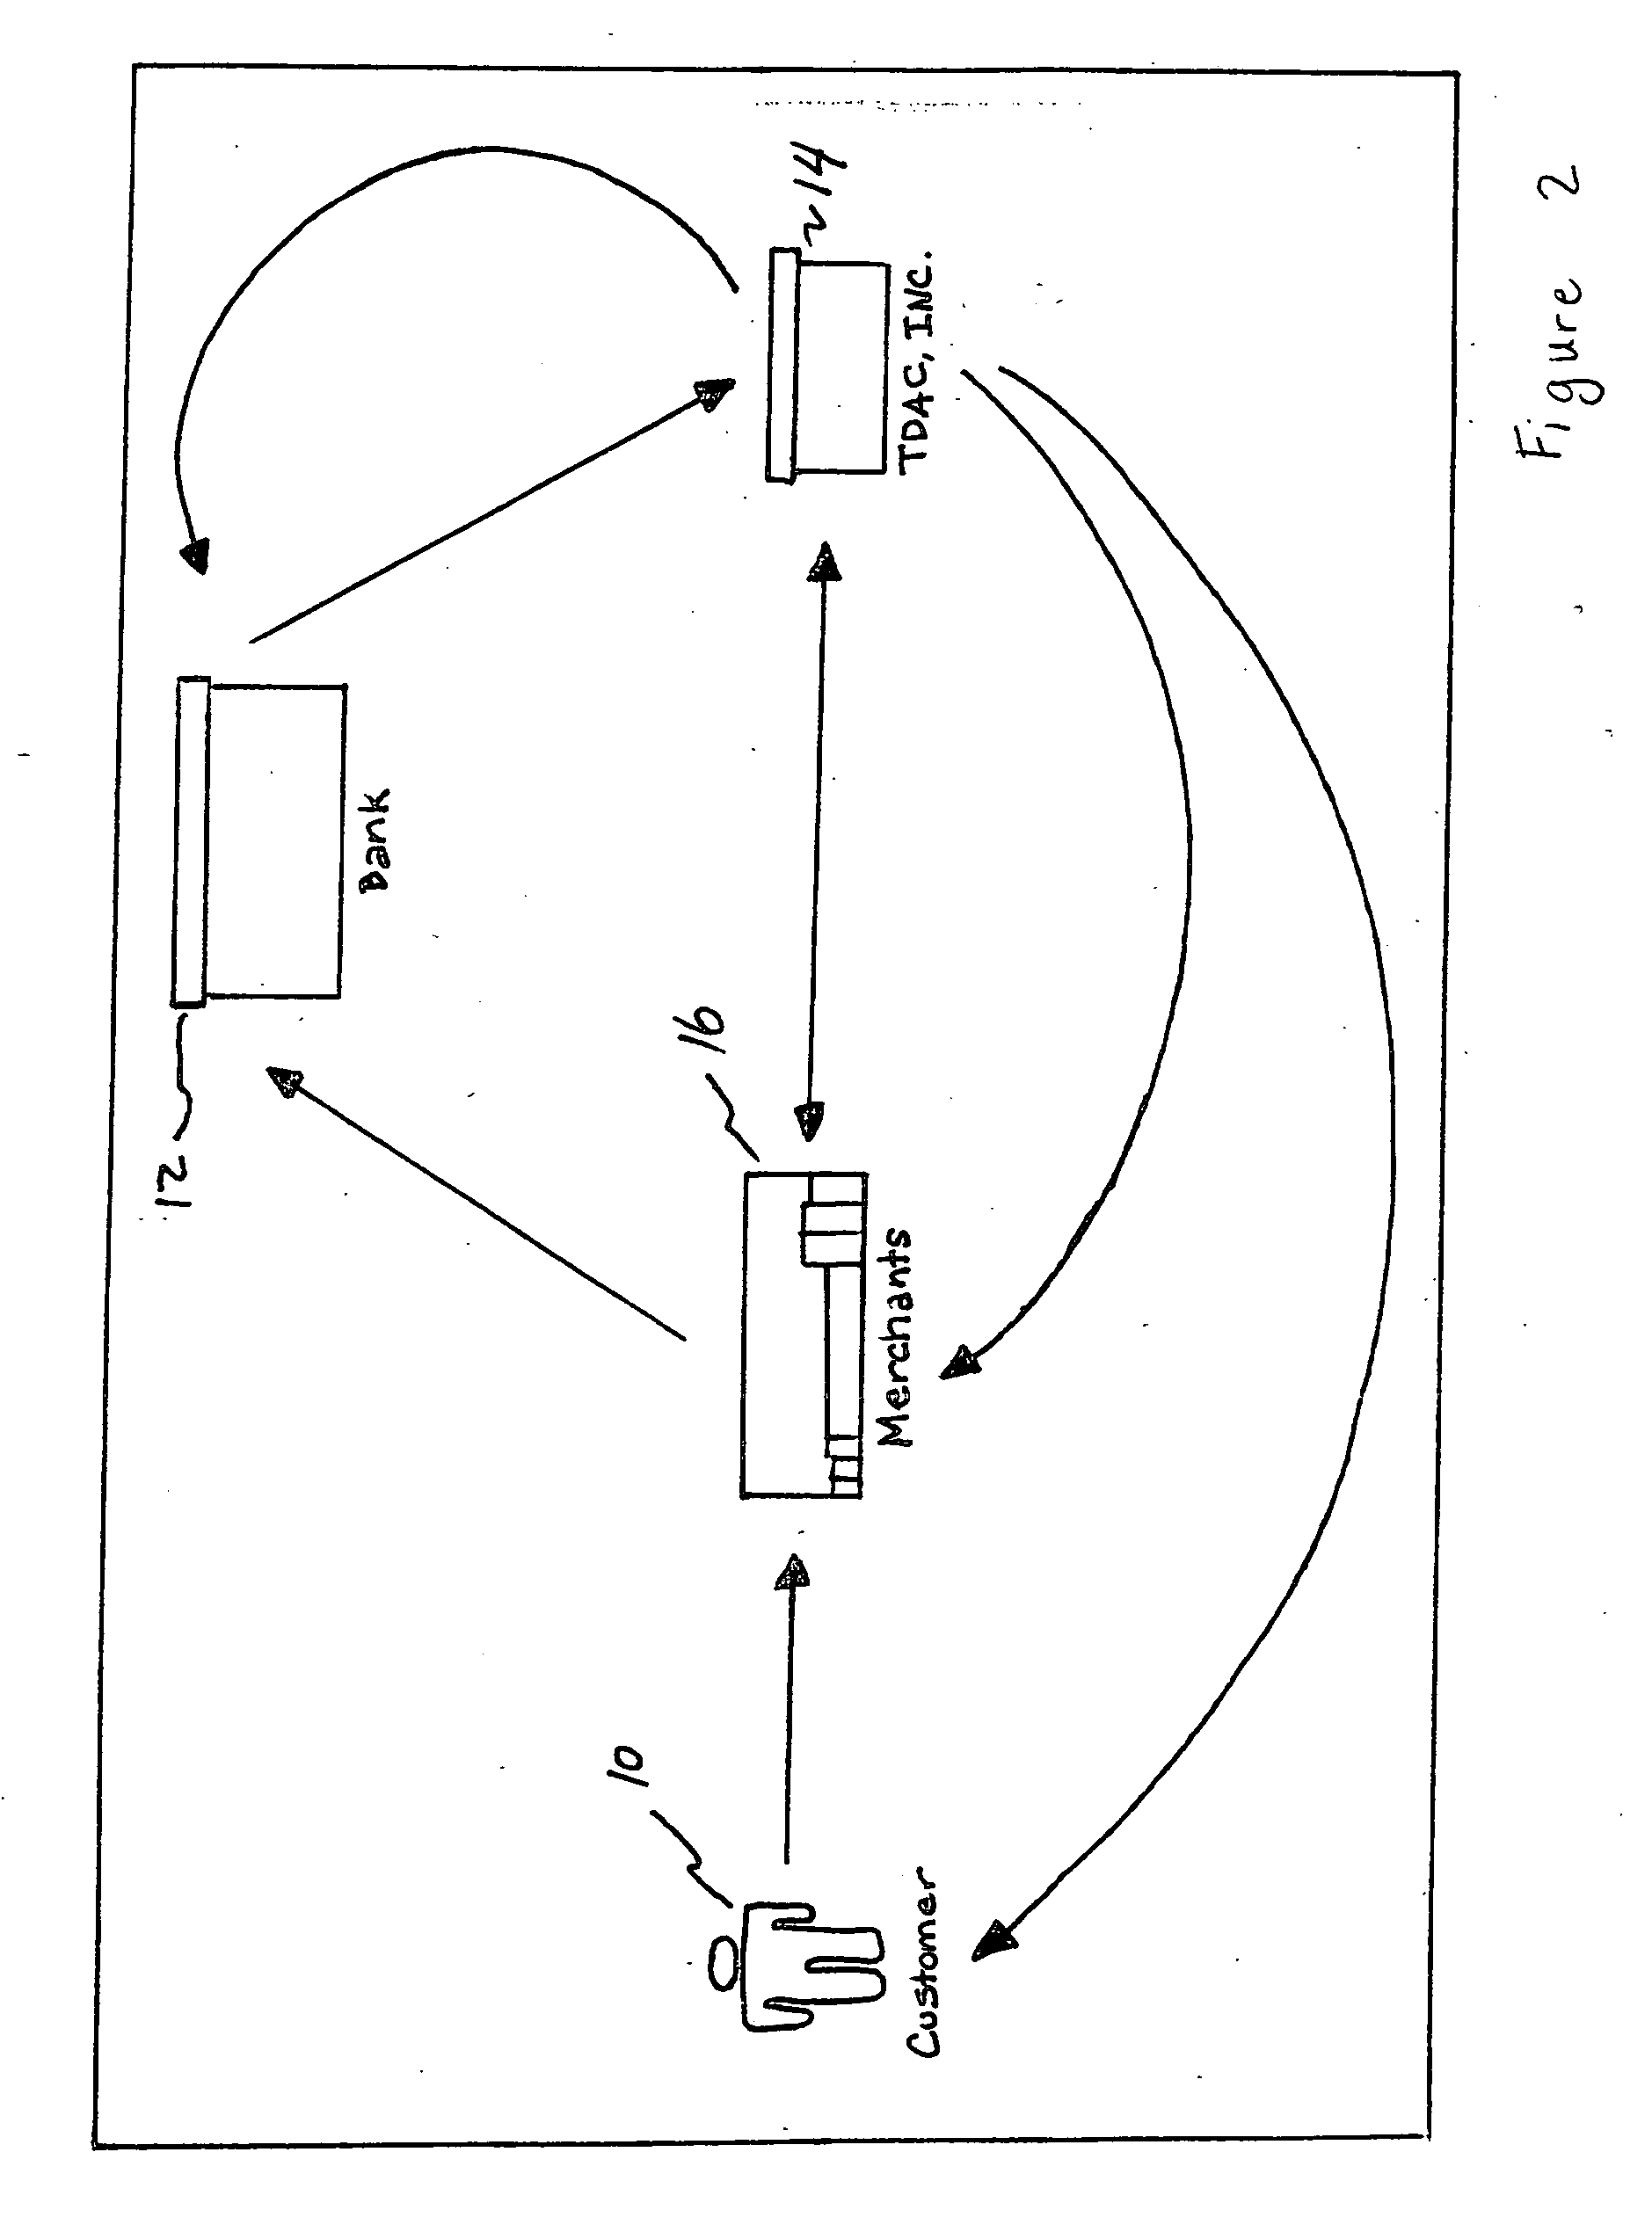 System and method for facilitating commercial transactions